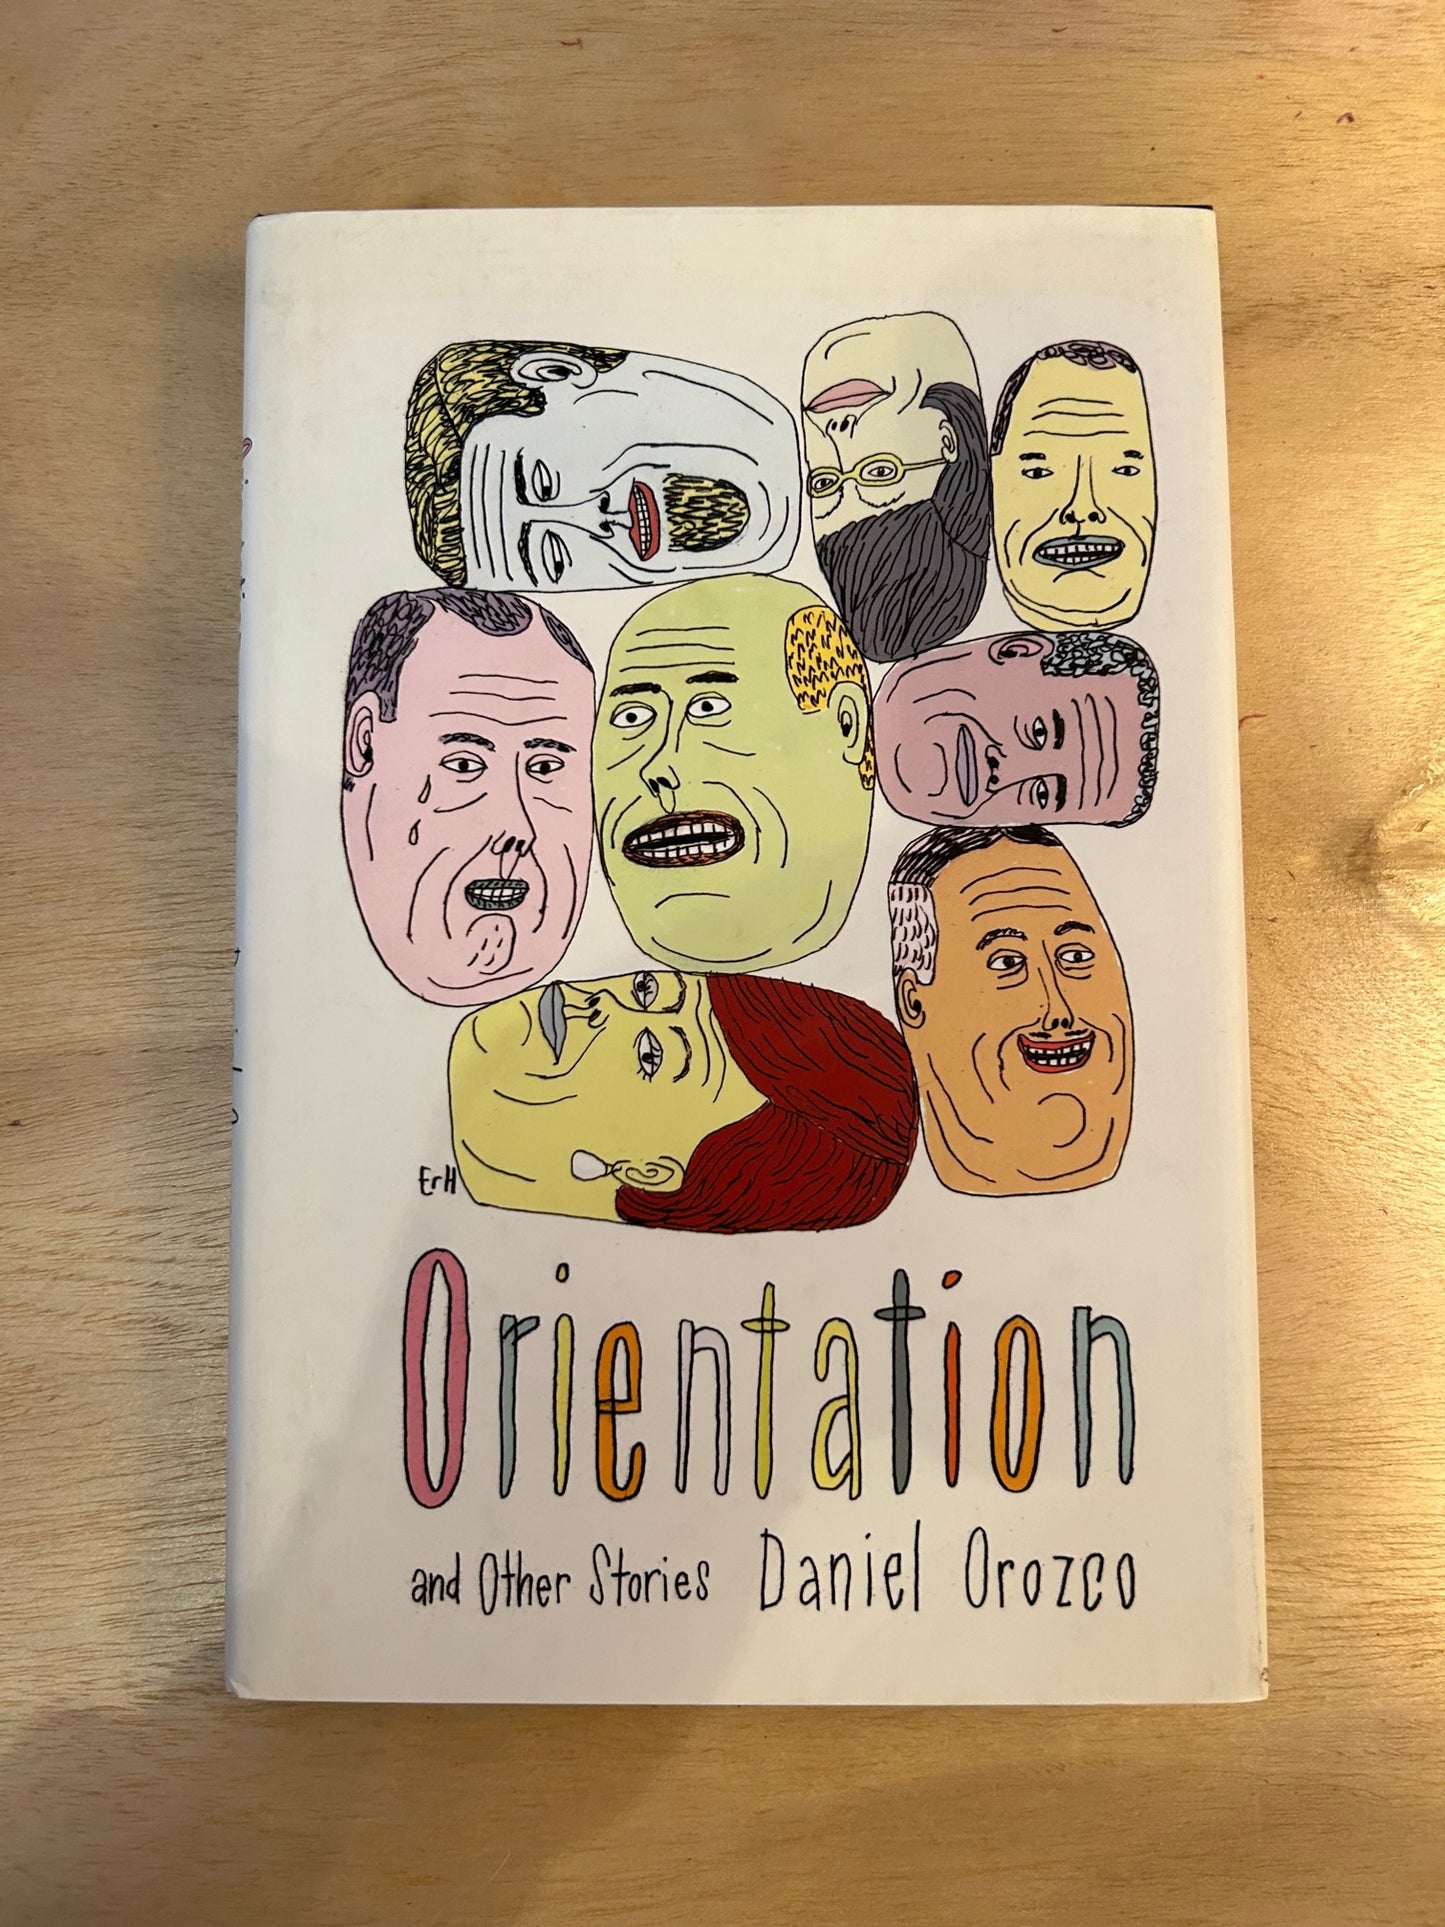 Orientation and Other Stories by Daniel Orozco (First Edition)